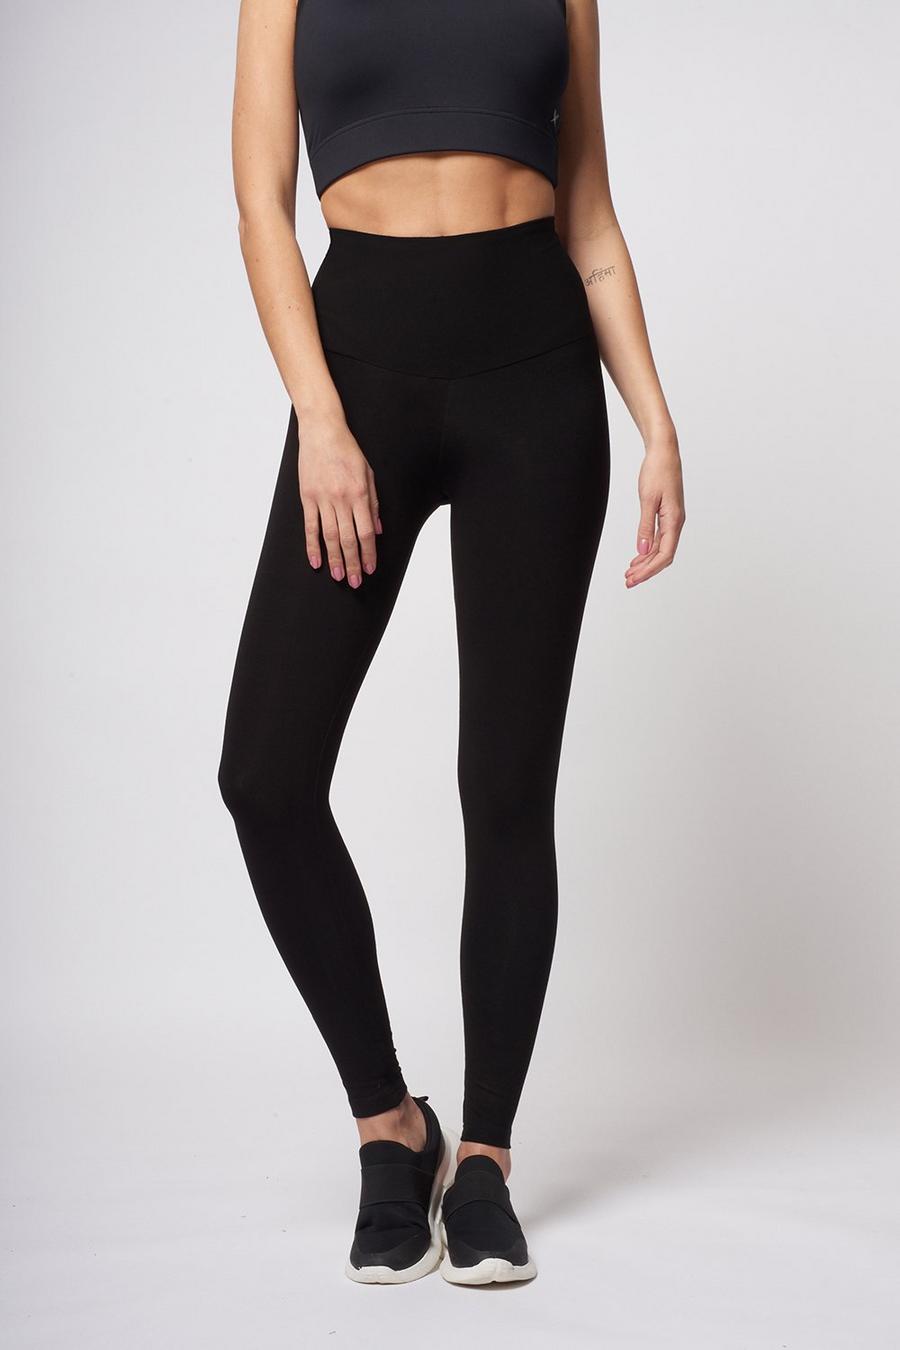 Black Lightweight Strong Compression Leggings with Standard Tummy Control